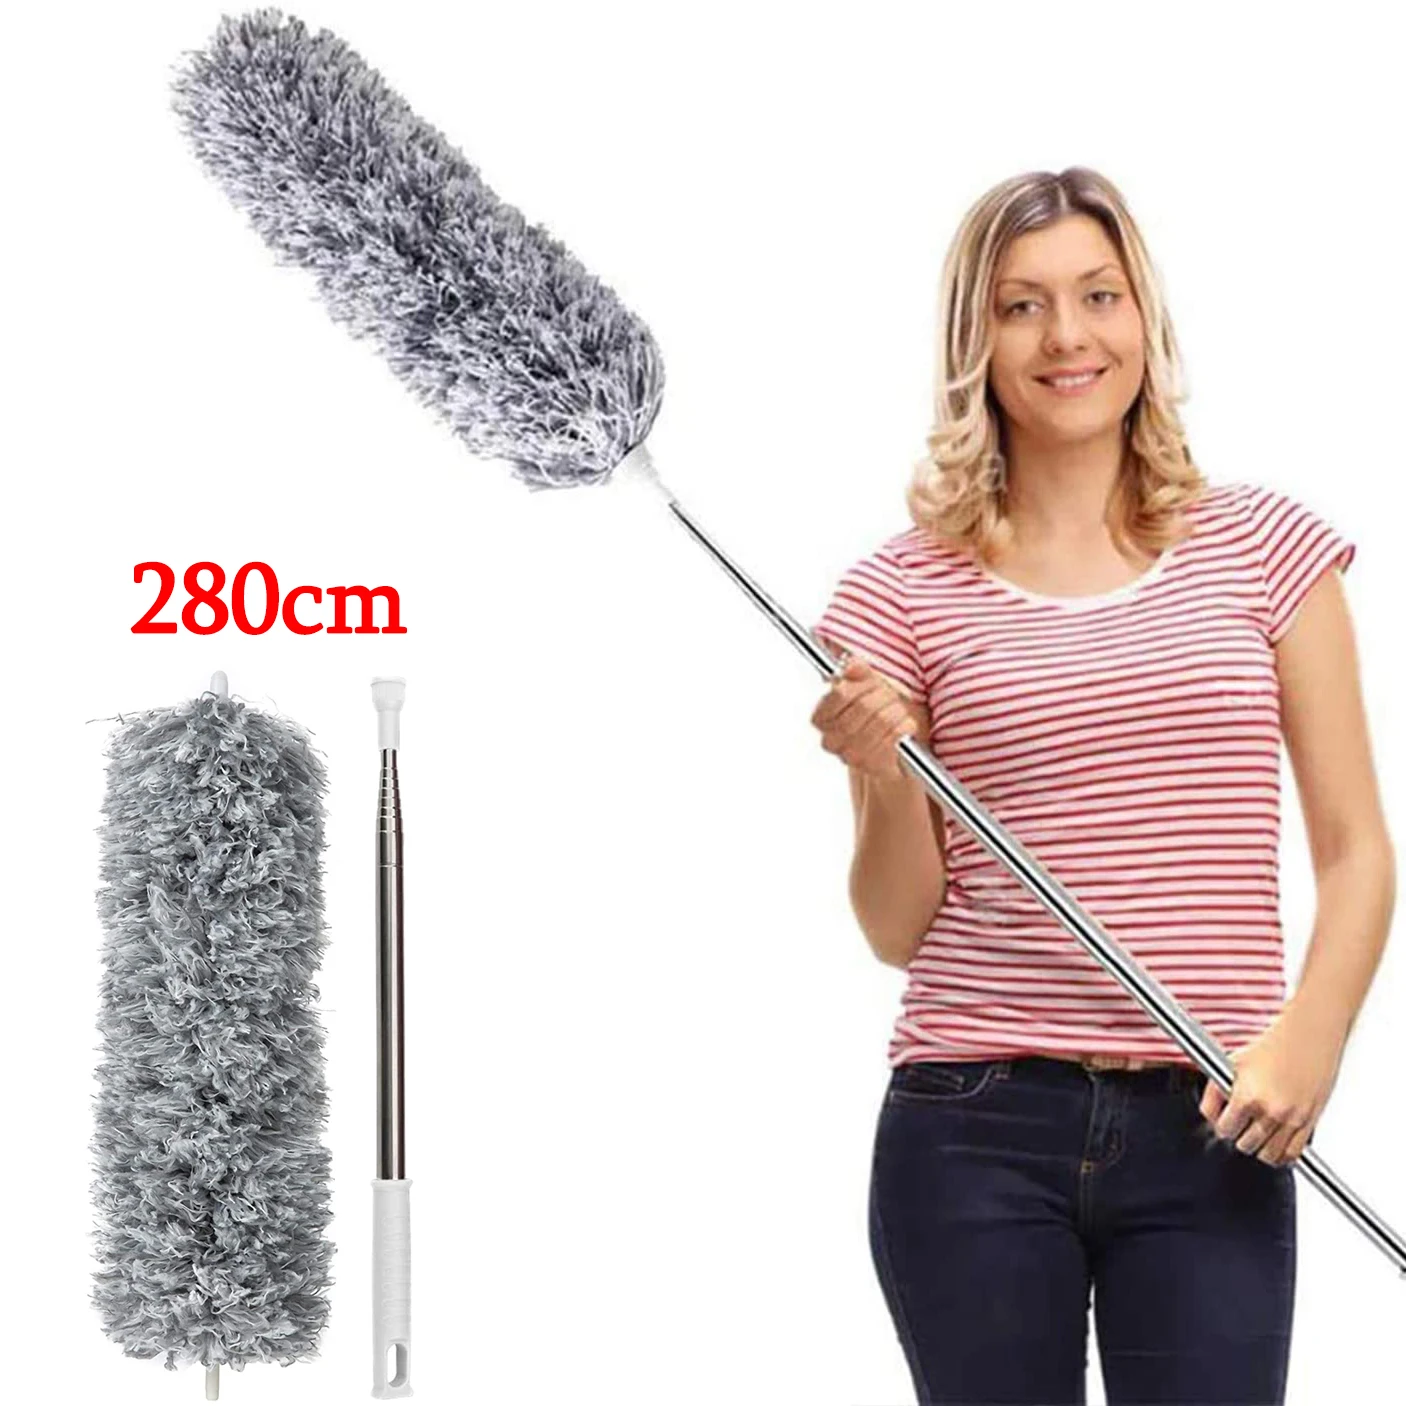 280cm Adjustable Telescopic Bending Duster Brush Feather Dust Cleaner Car Furniture Gap Cleaning Brush Dust Removal Tool